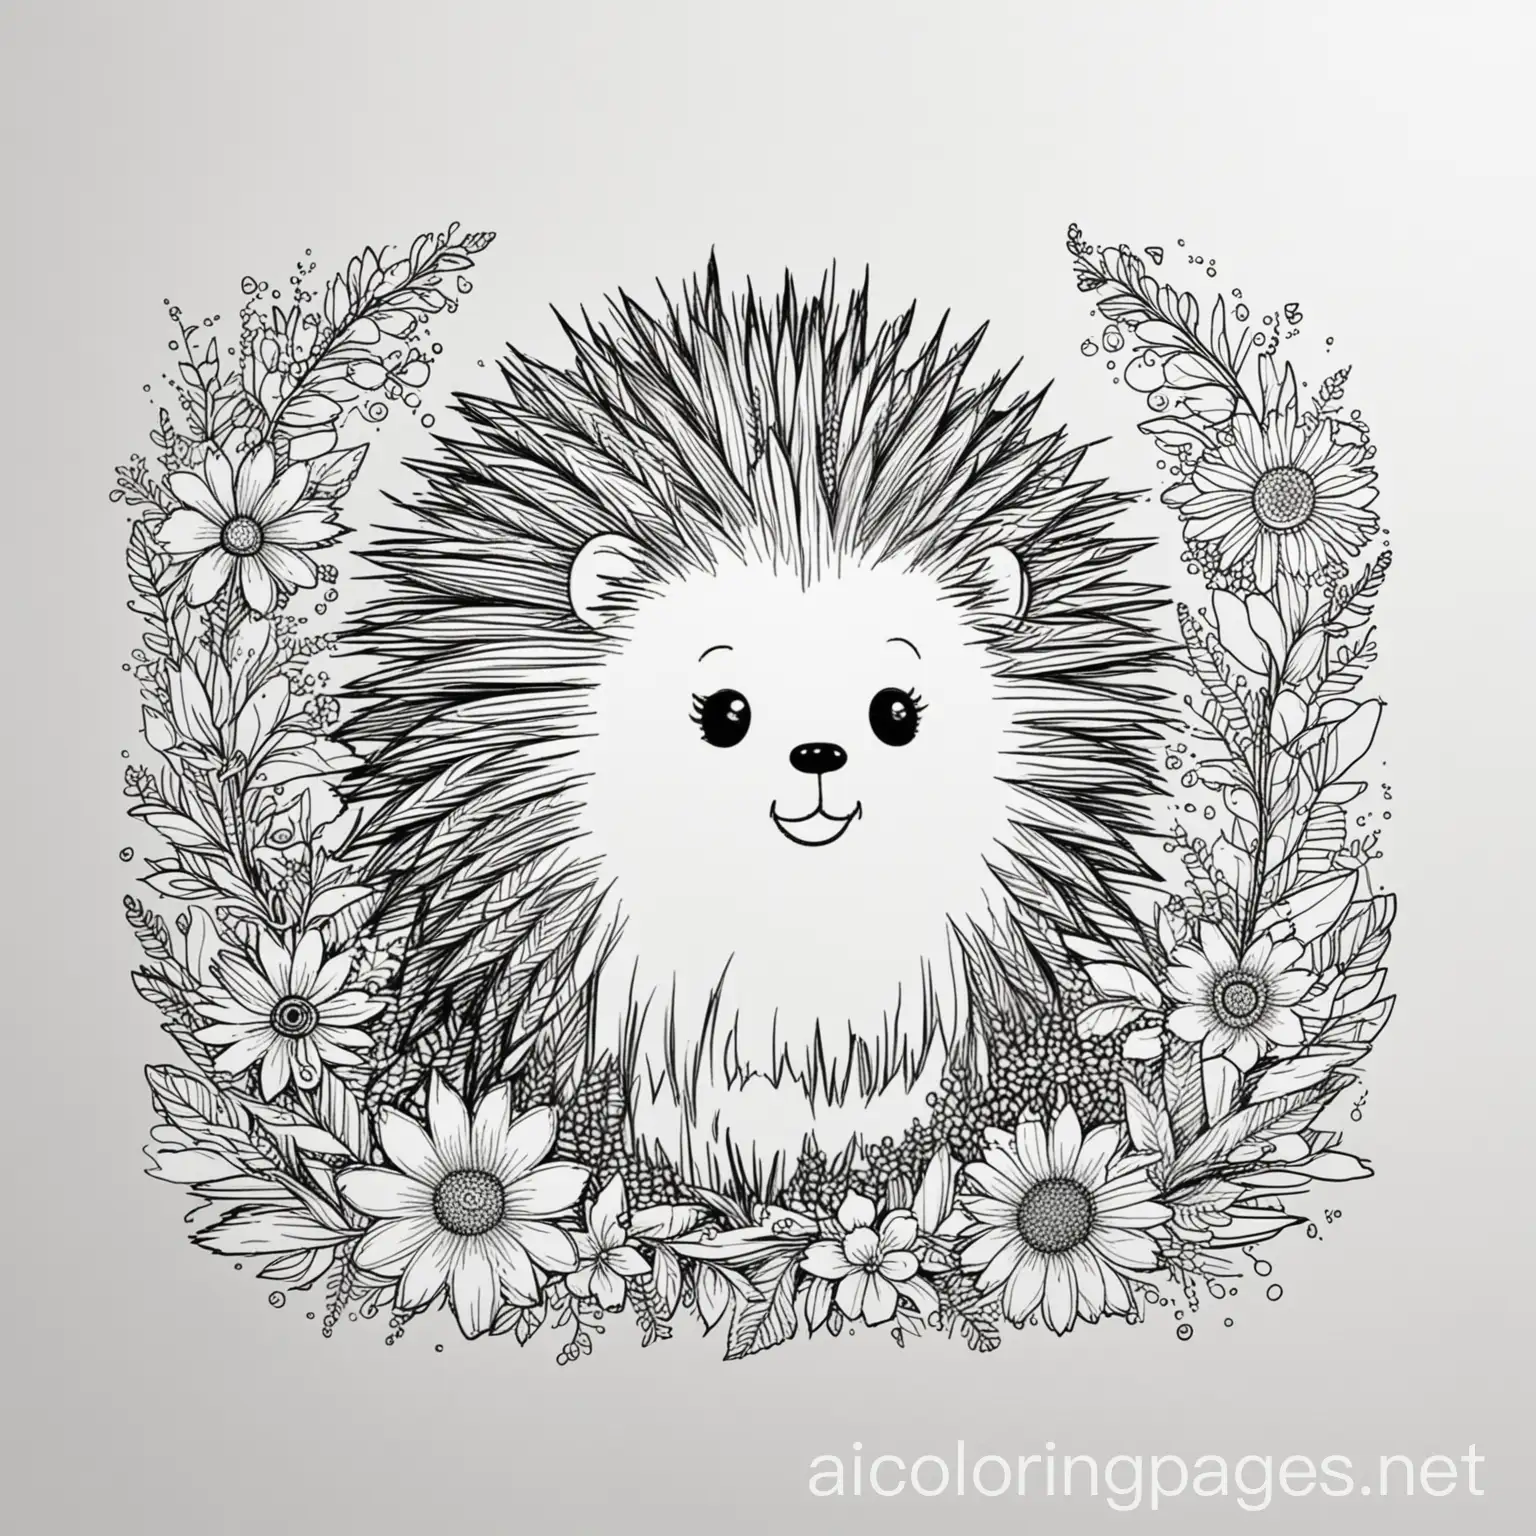 Porcupine-with-Flowers-Coloring-Page-Black-and-White-Line-Art-for-Kids